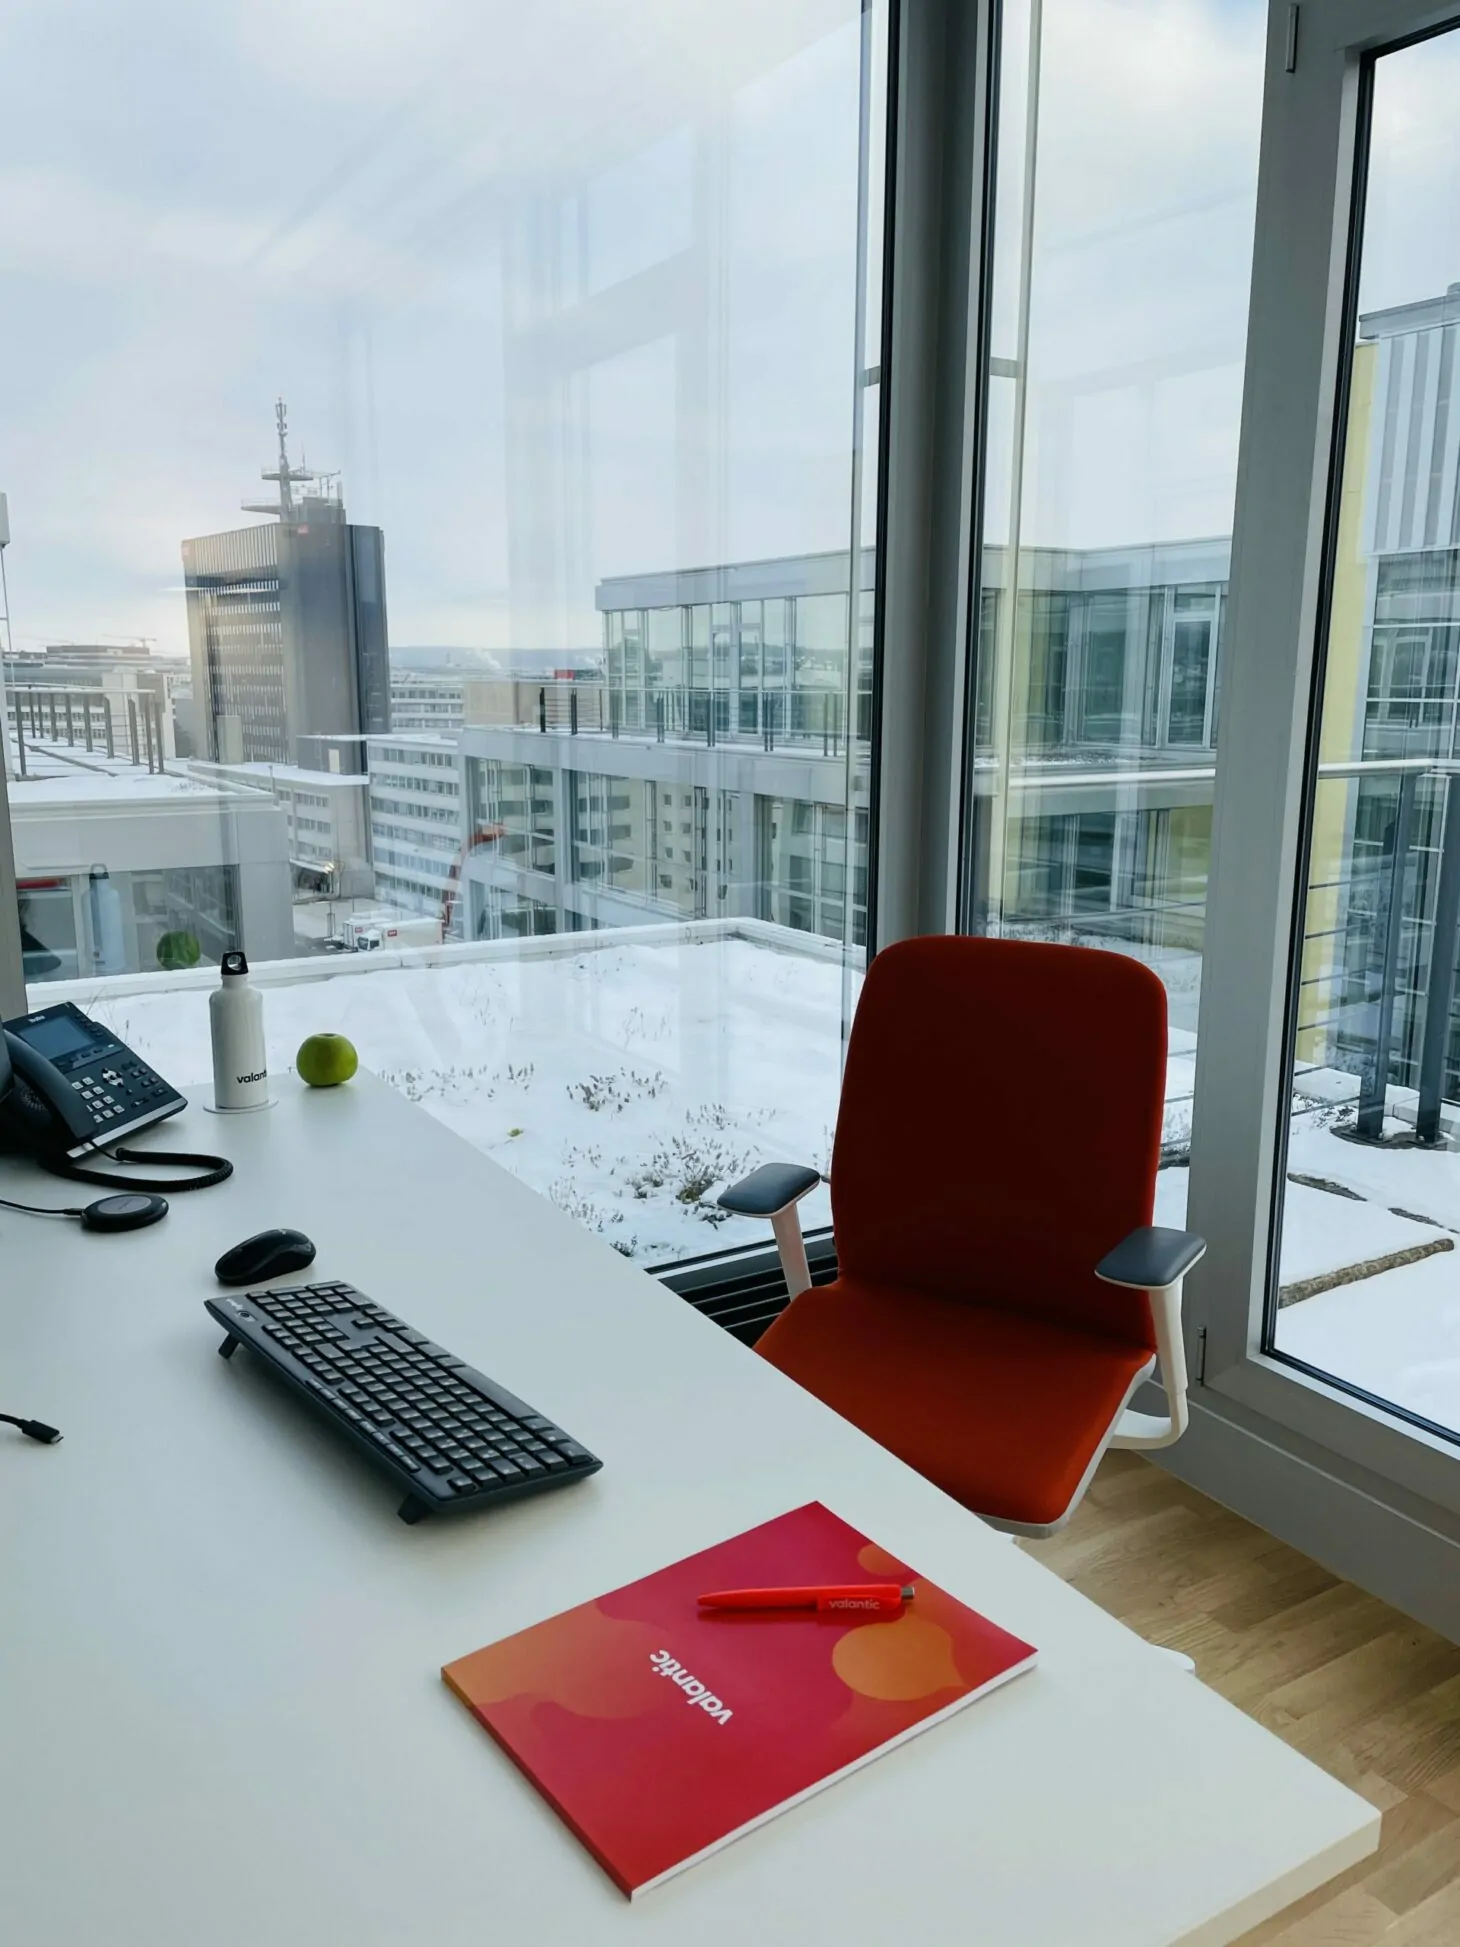 Image of an office desk of the valantic Zurich branch with a window view